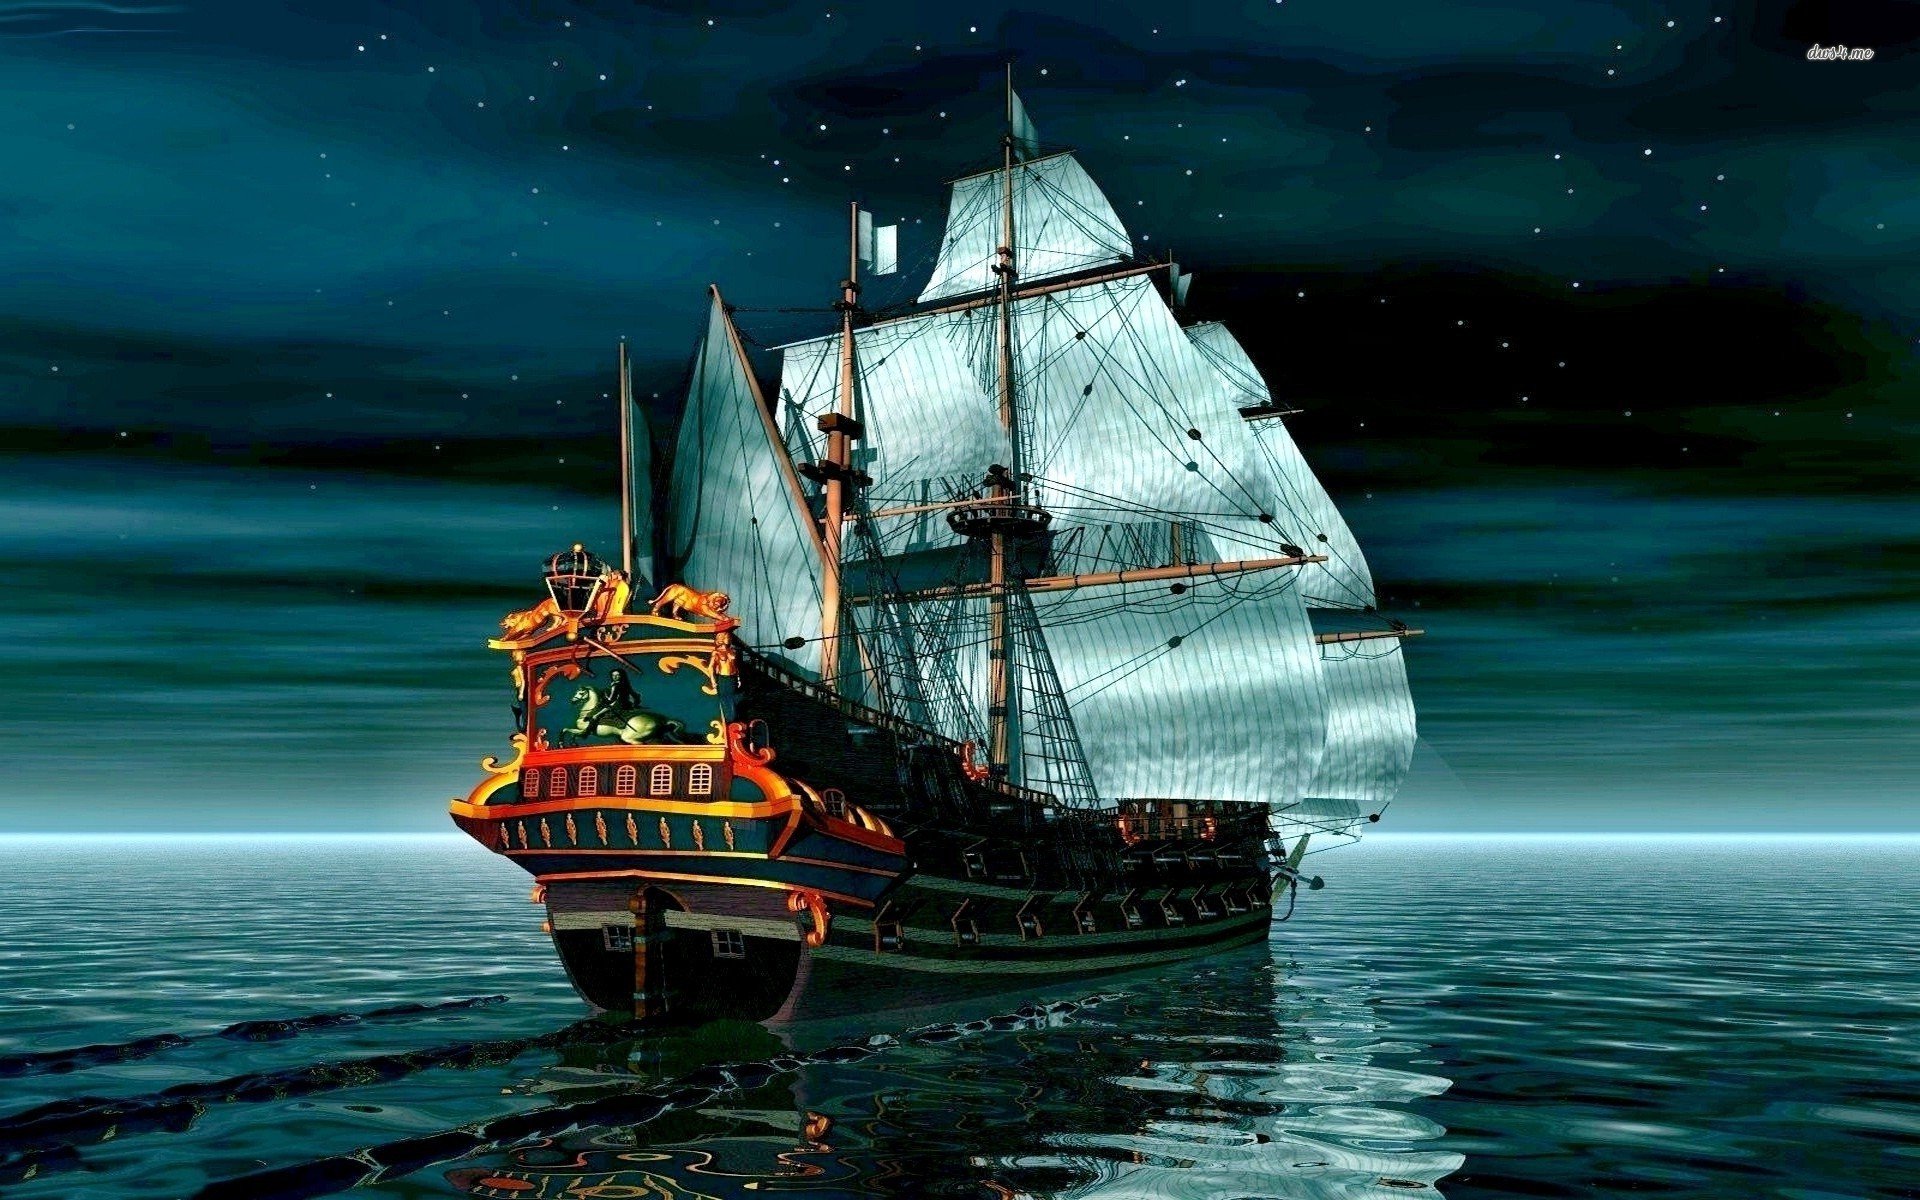  pirate comedy ghost puzzle 1voojuisland ship boat wallpaper background